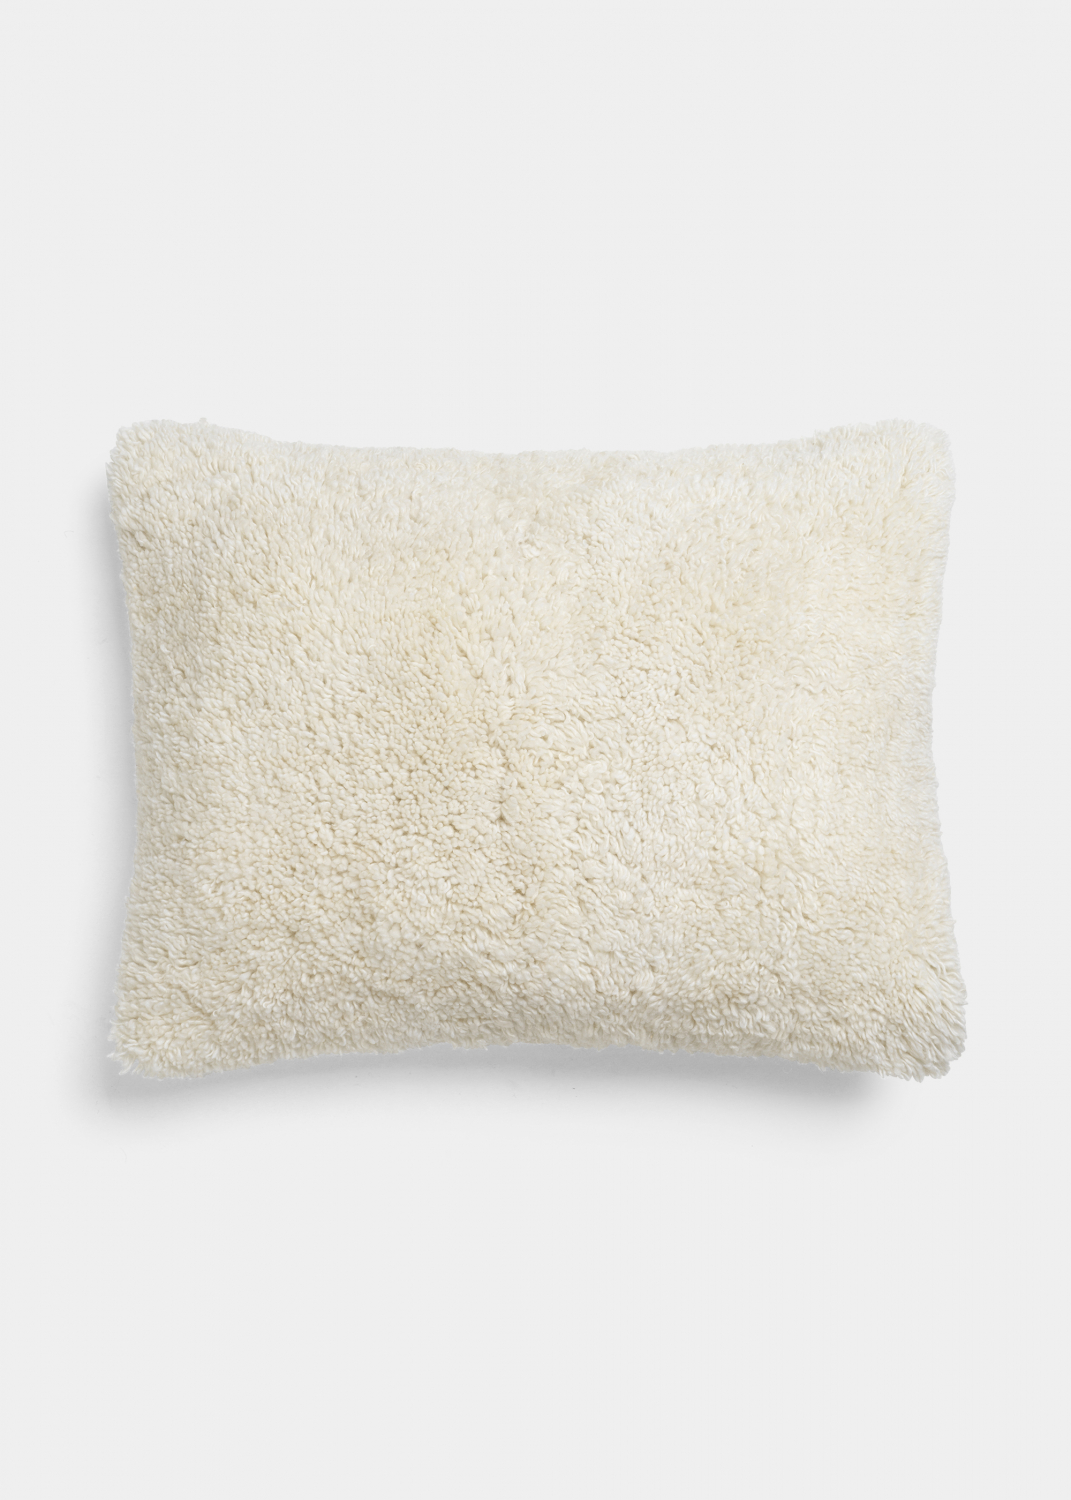 Cushions - Puffy Cashmere Pillow (30x40)